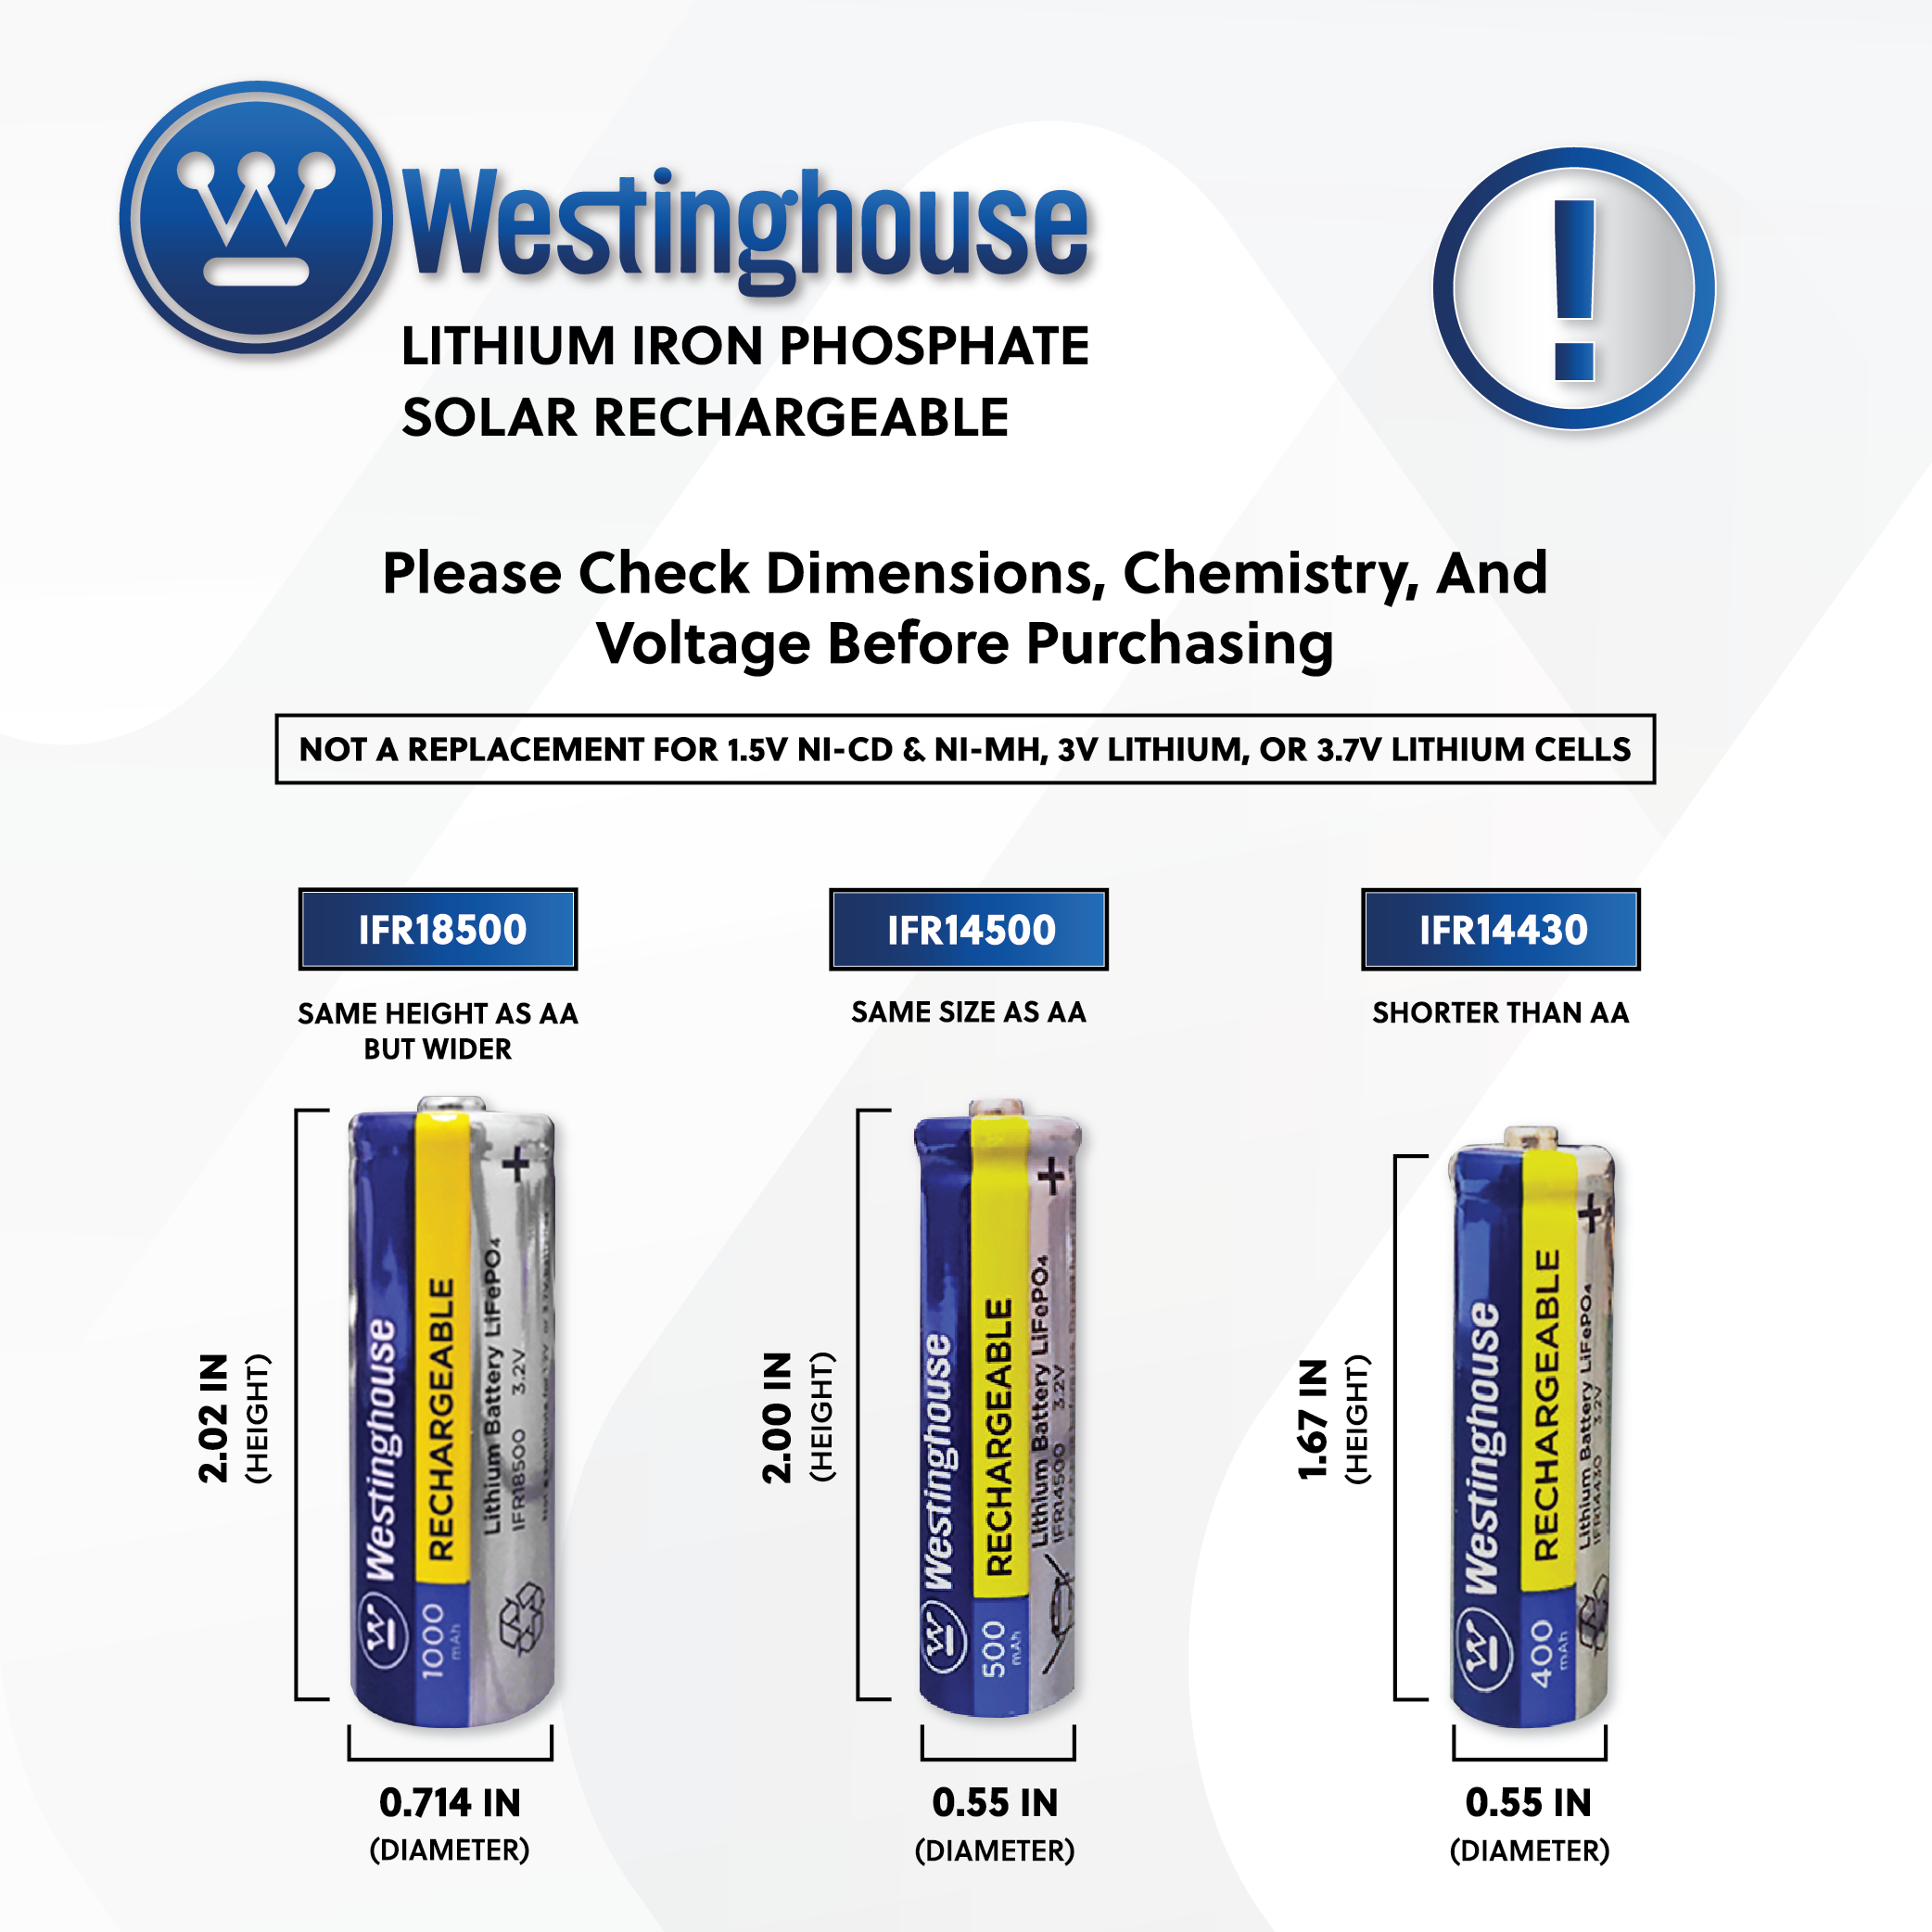 Westinghouse Life-PO4 14500 3.2v 500mah Solar Rechargeable Cardboard Box of 8